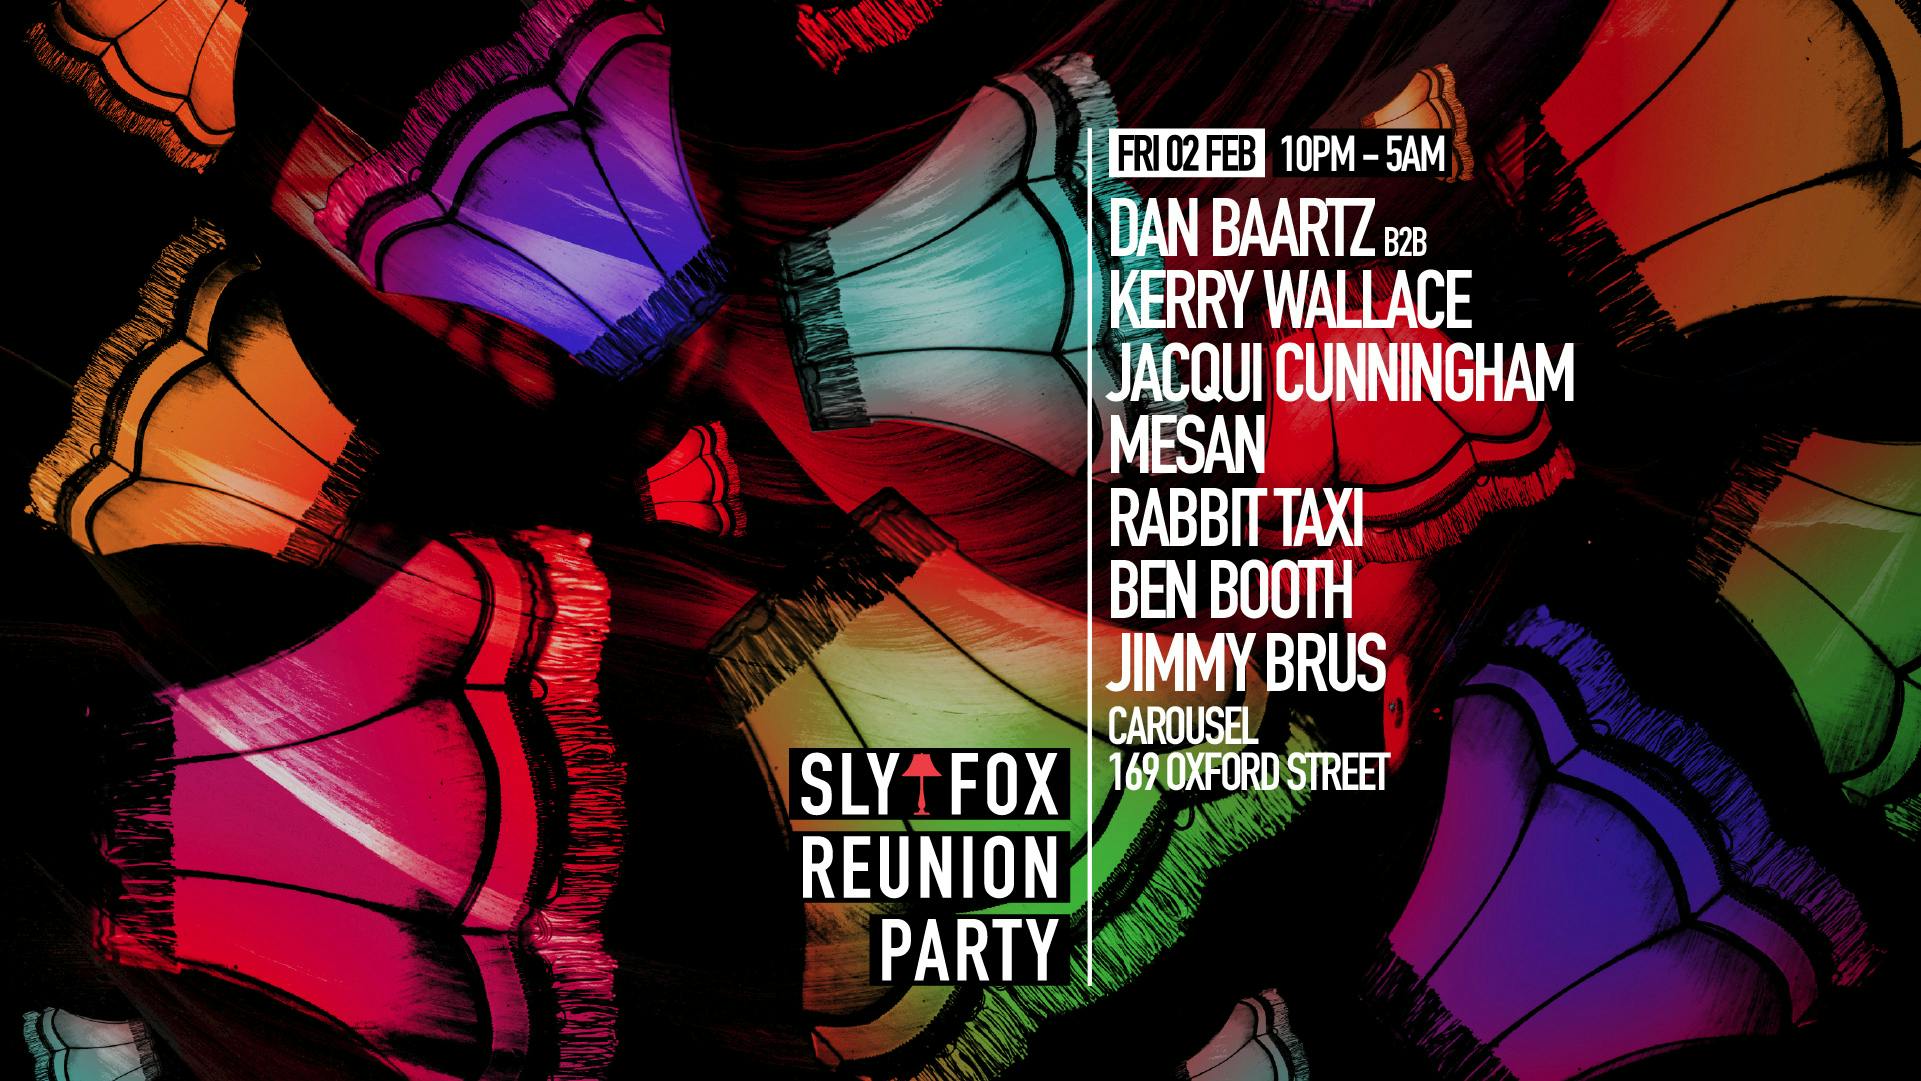 SLYFOX Reunion Party - Friday 2nd February